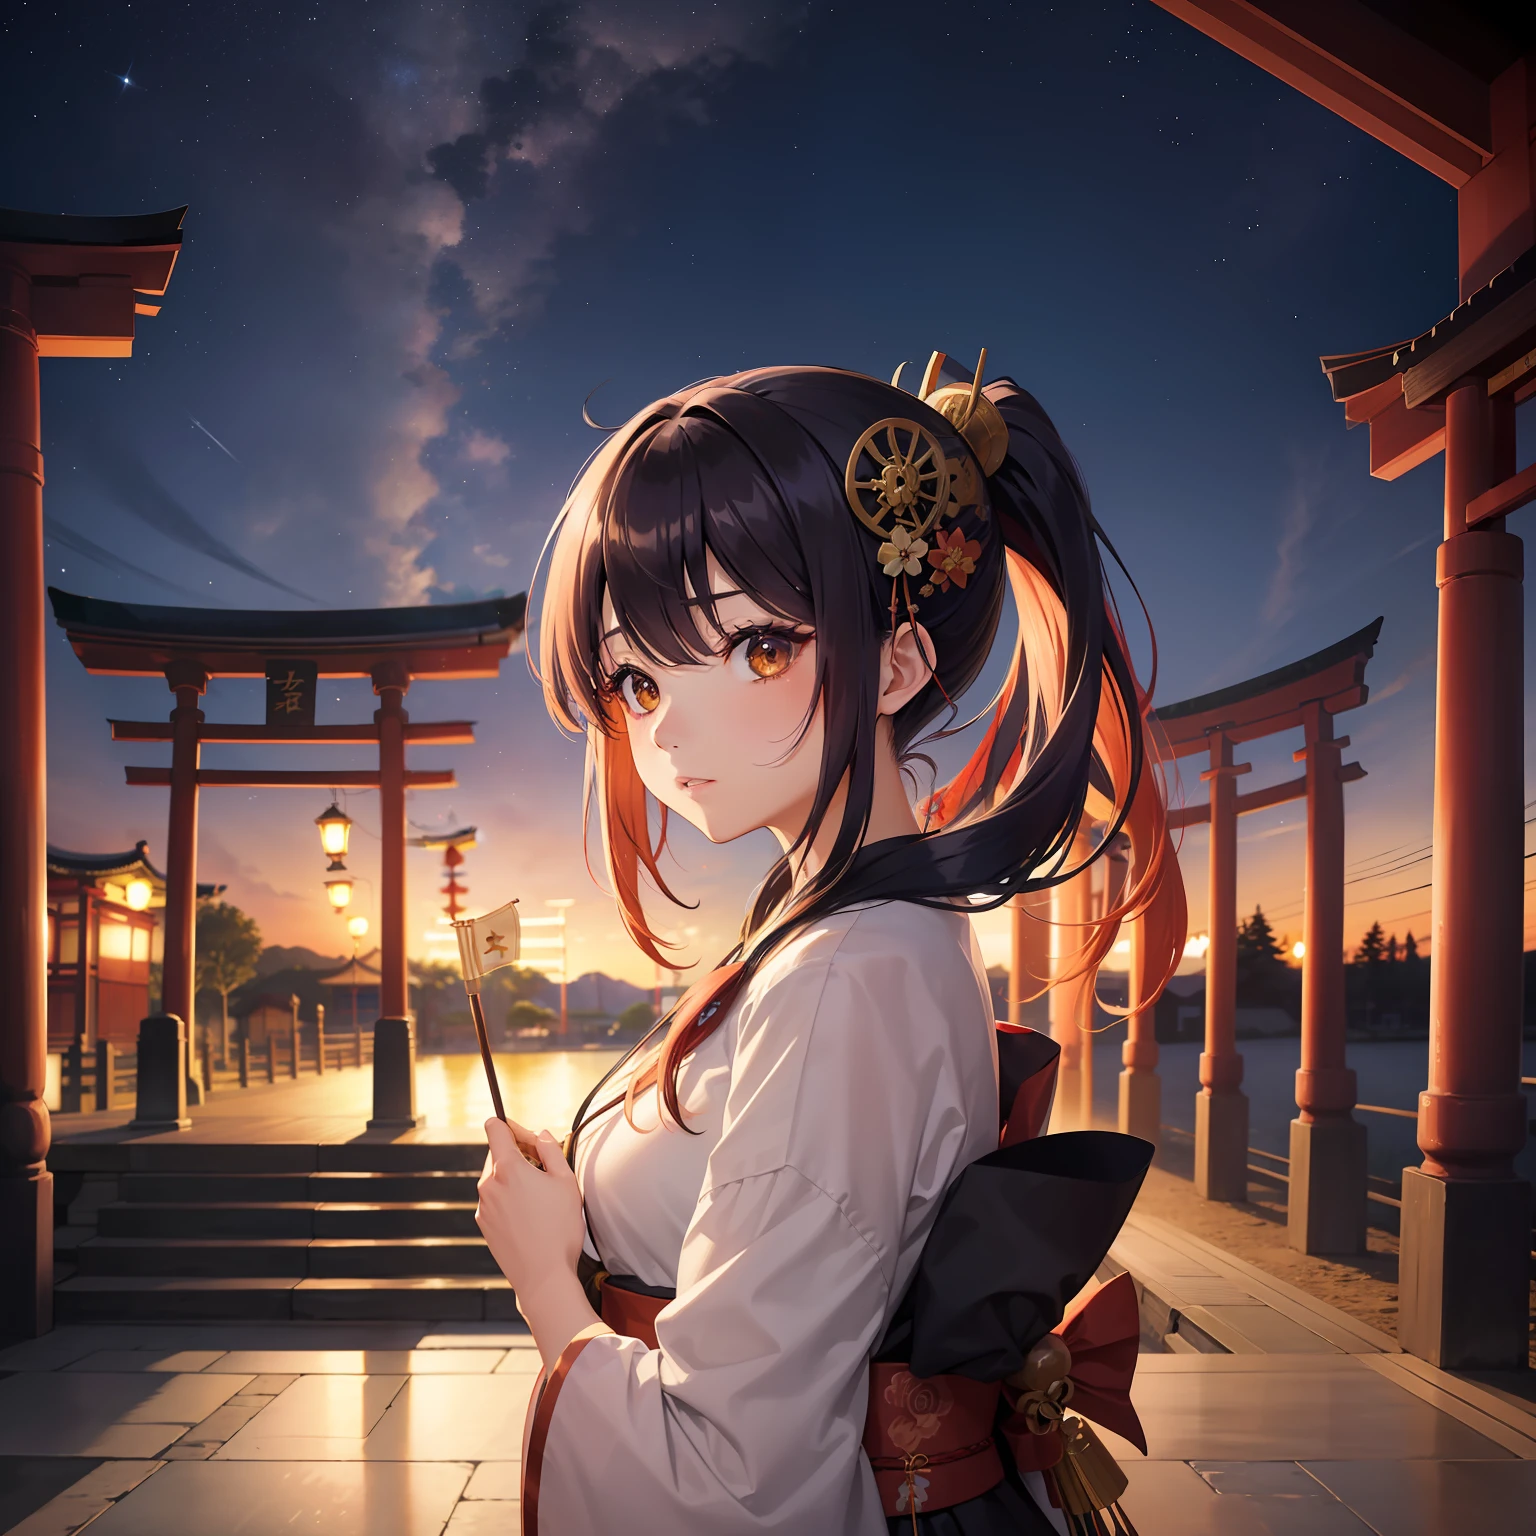 watercolor paiting(Beautifully Aesthetic:1.2)、(1girl in:1.3)、(Higanbana Hair、colourful hair、Half black and half red hair:1.2)、Eau、liquids、natta、colourfull、starrysky、stele、nigh sky、a dark night、Black kimono、Dancing in front of a large torii gate、Landscape painting、glowing lanterns、Fantastical、Evening primrose blooms profusely、shrineystical、